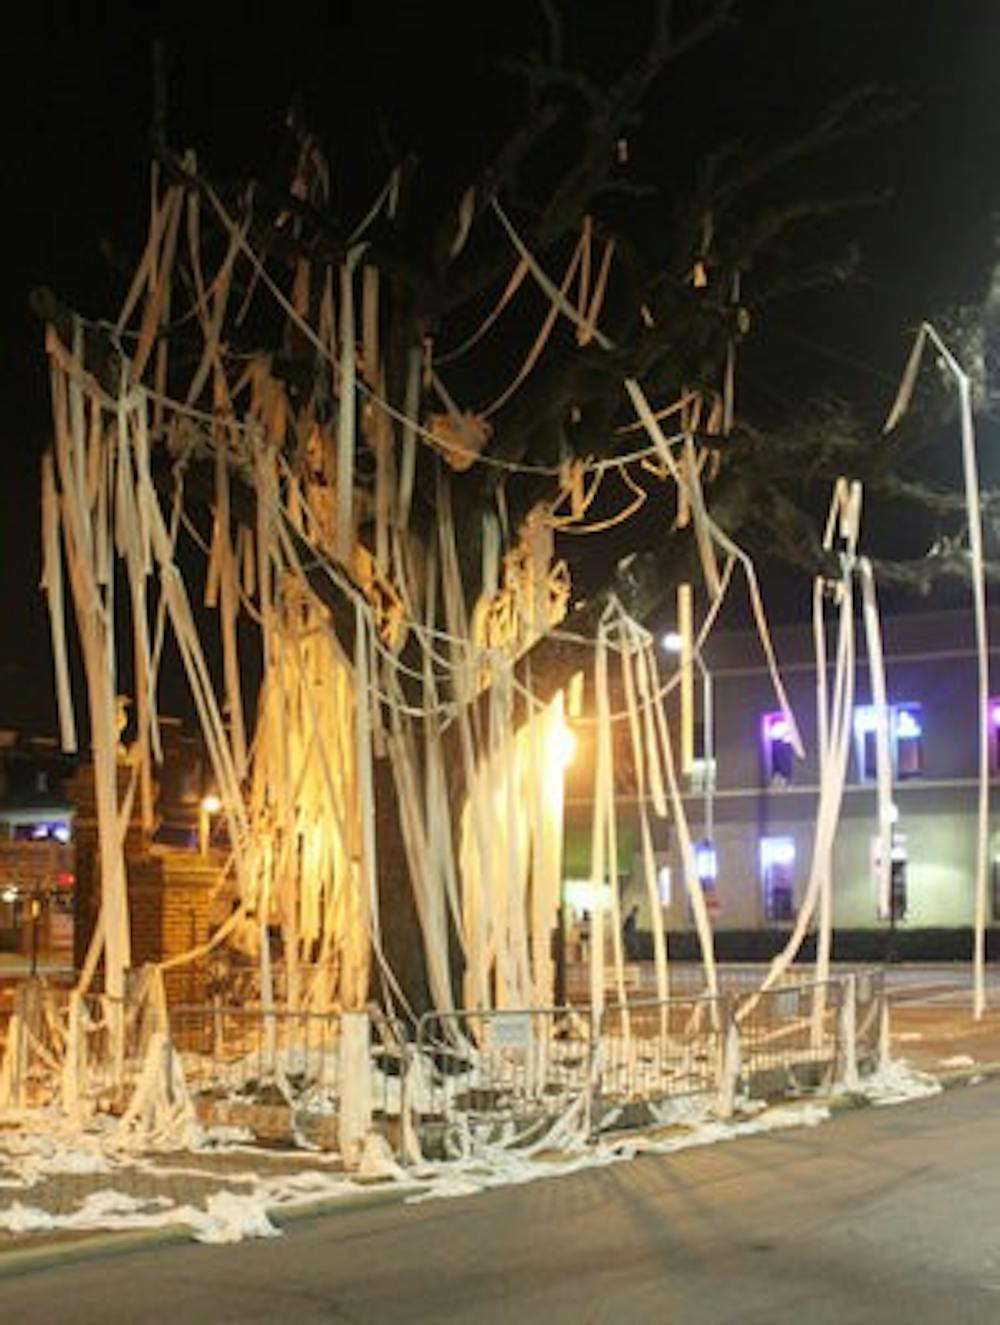 The trees were traditionally rolled after a major win for Auburn. (Katherine McCahey / ASSISTANT PHOTO EDITOR)